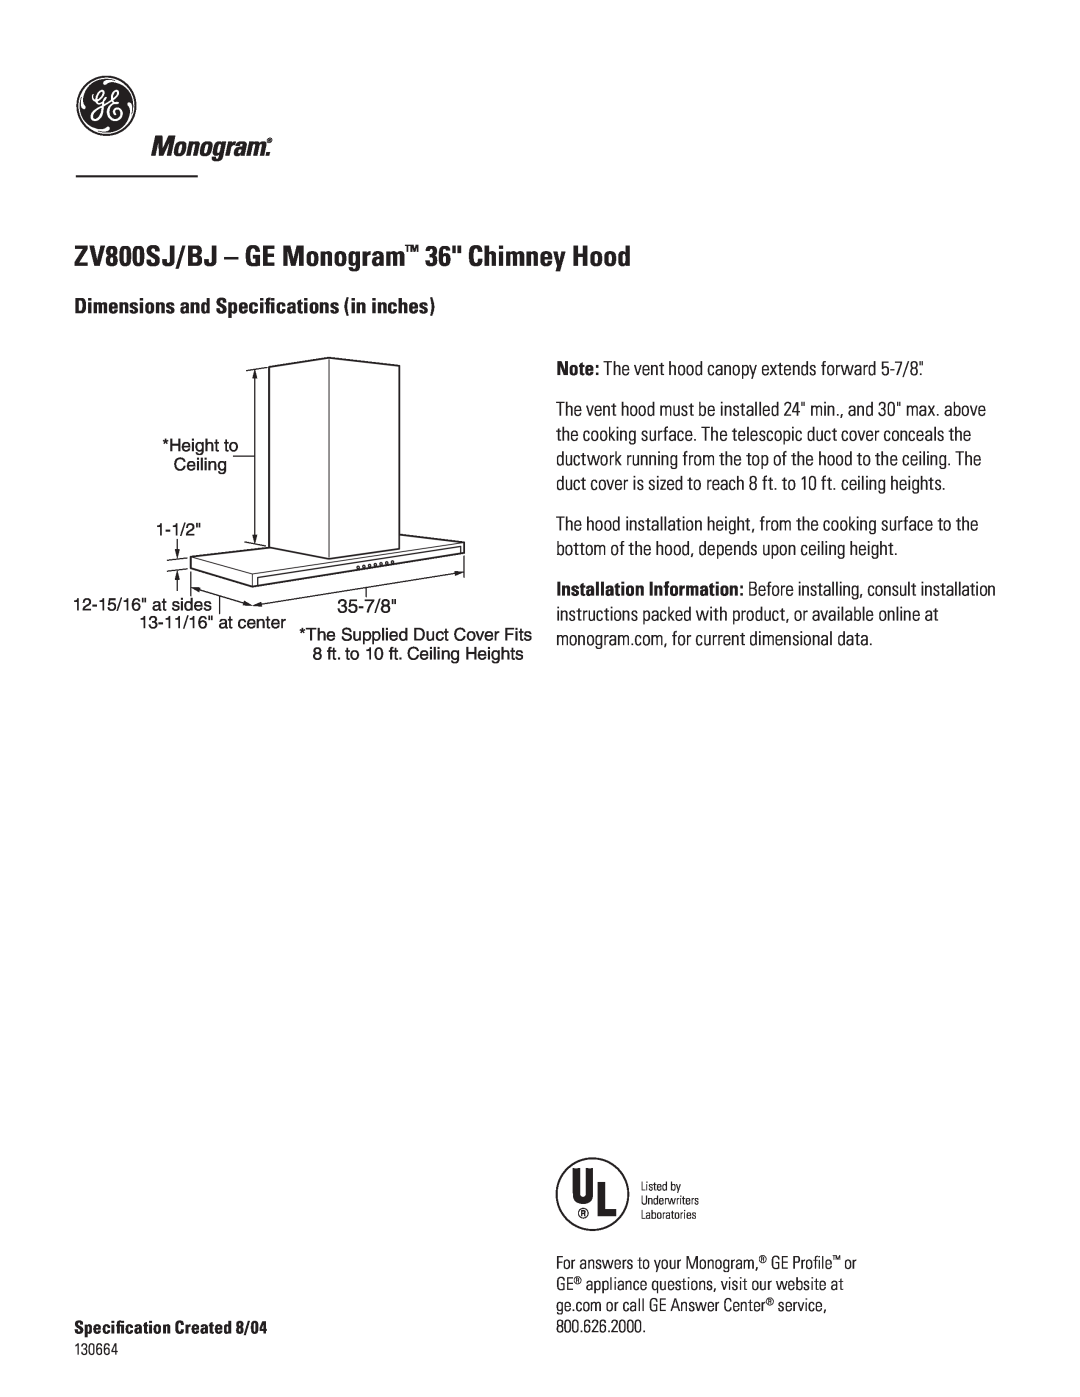 GE Monogram dimensions ZV800SJ/BJ - GE Monogram 36 Chimney Hood, Dimensions and Speciﬁcations in inches, 35-7/8 